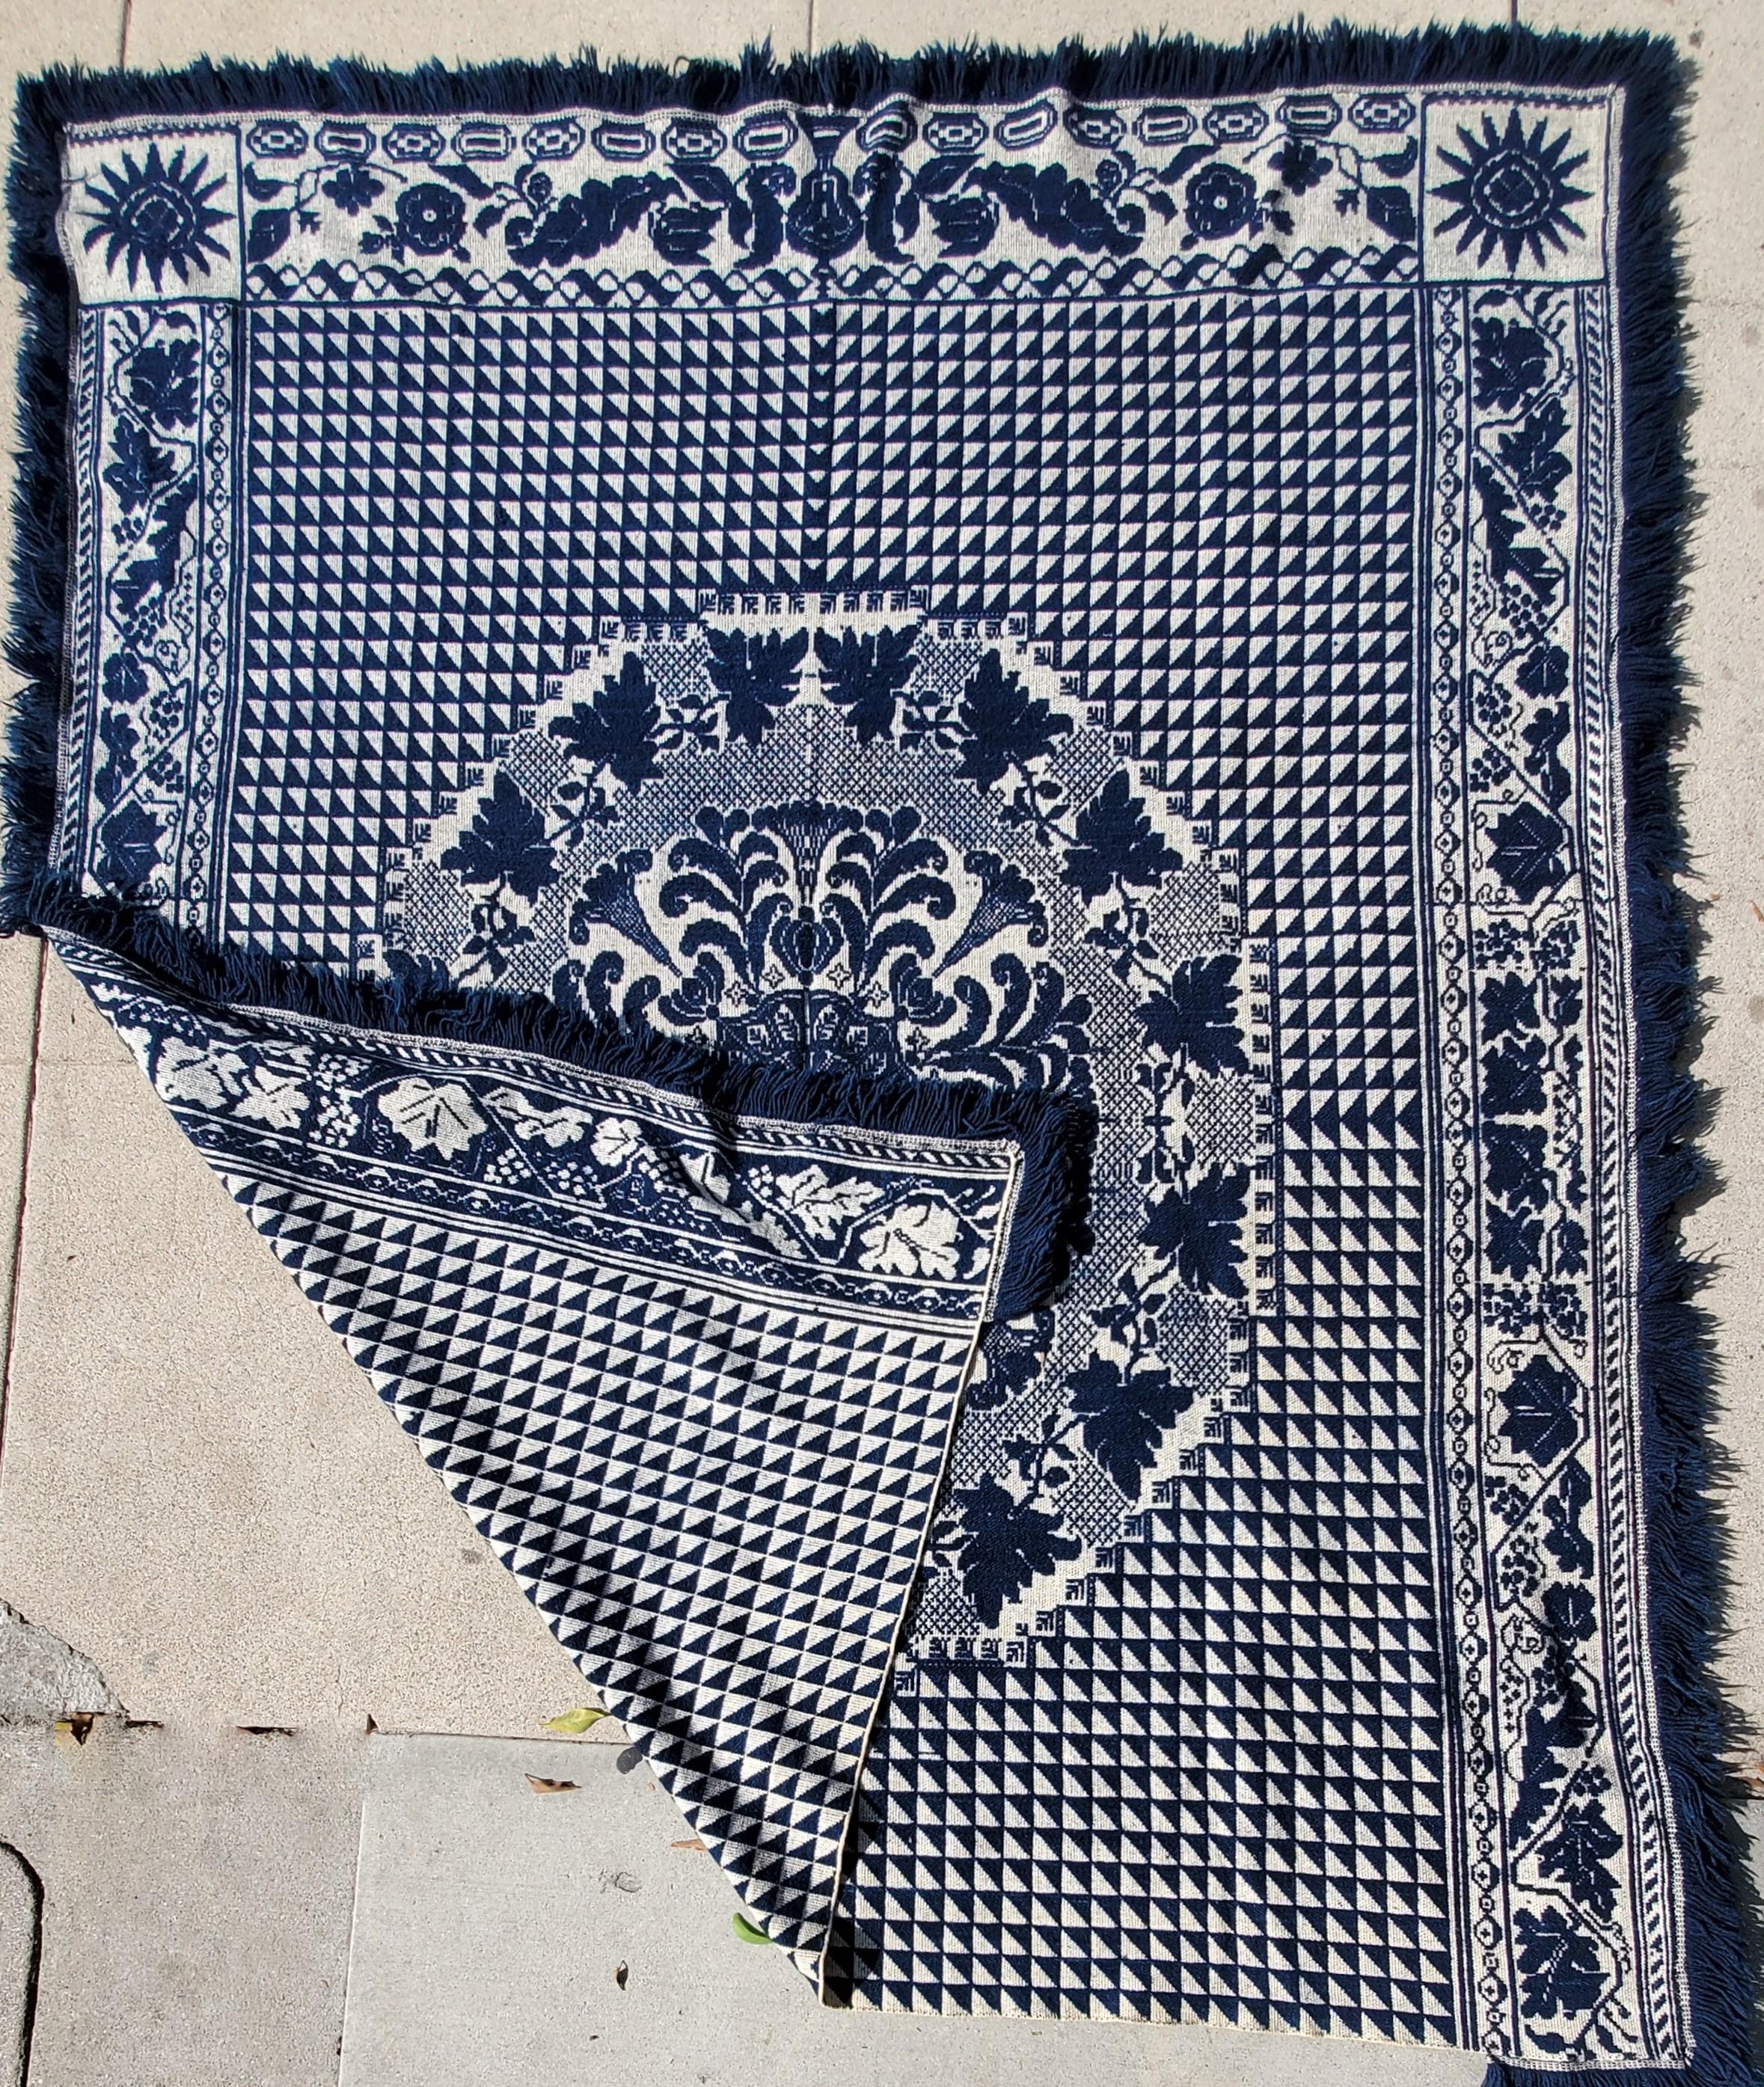 This fine original fringed indigo & white jacquard coverlet from Pennsylvania is in fine condition. It has a flying geese or birds in flight pattern similar to a quilt. It dates from 1850-1860 and was found in a private collection in Lancaster